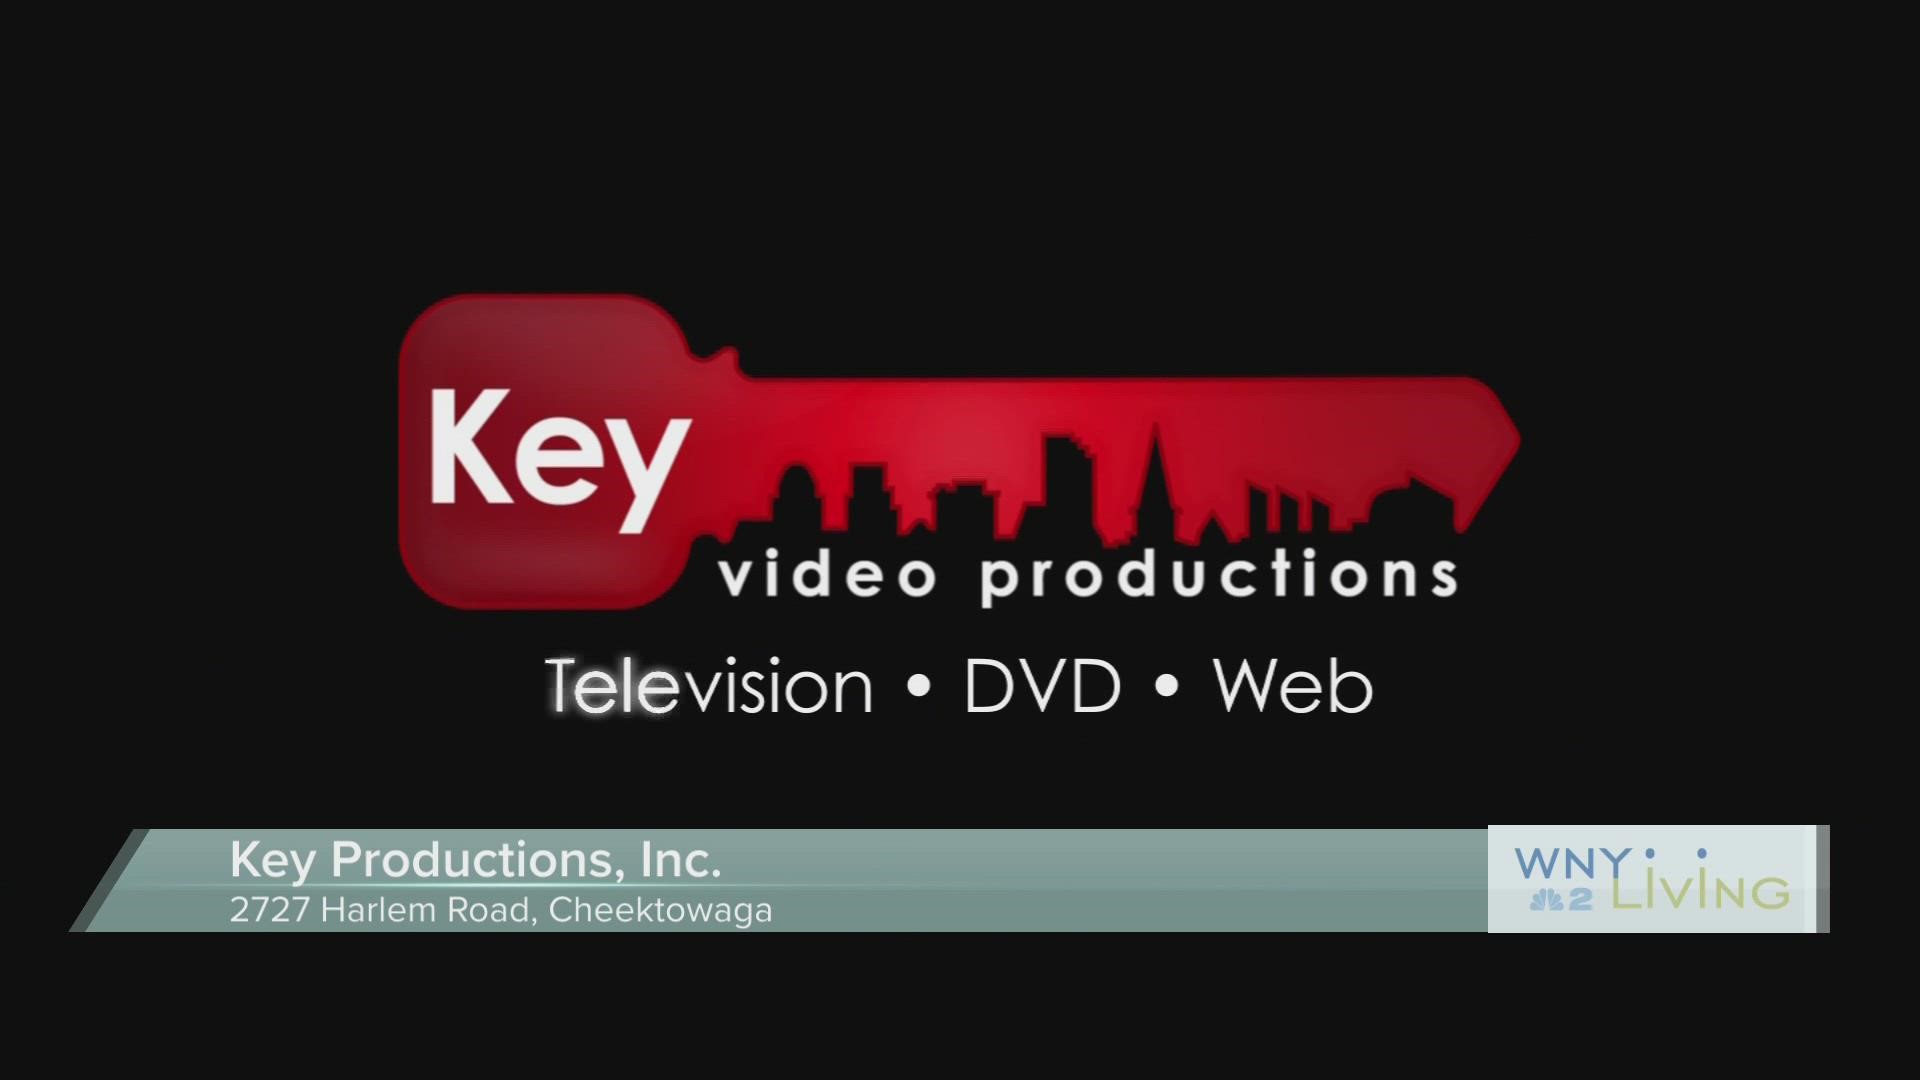 WNY Living - November 26 - Key Productions, Inc. (THIS VIDEO IS SPONSORED BY KEY PRODUCTIONS, INC.)